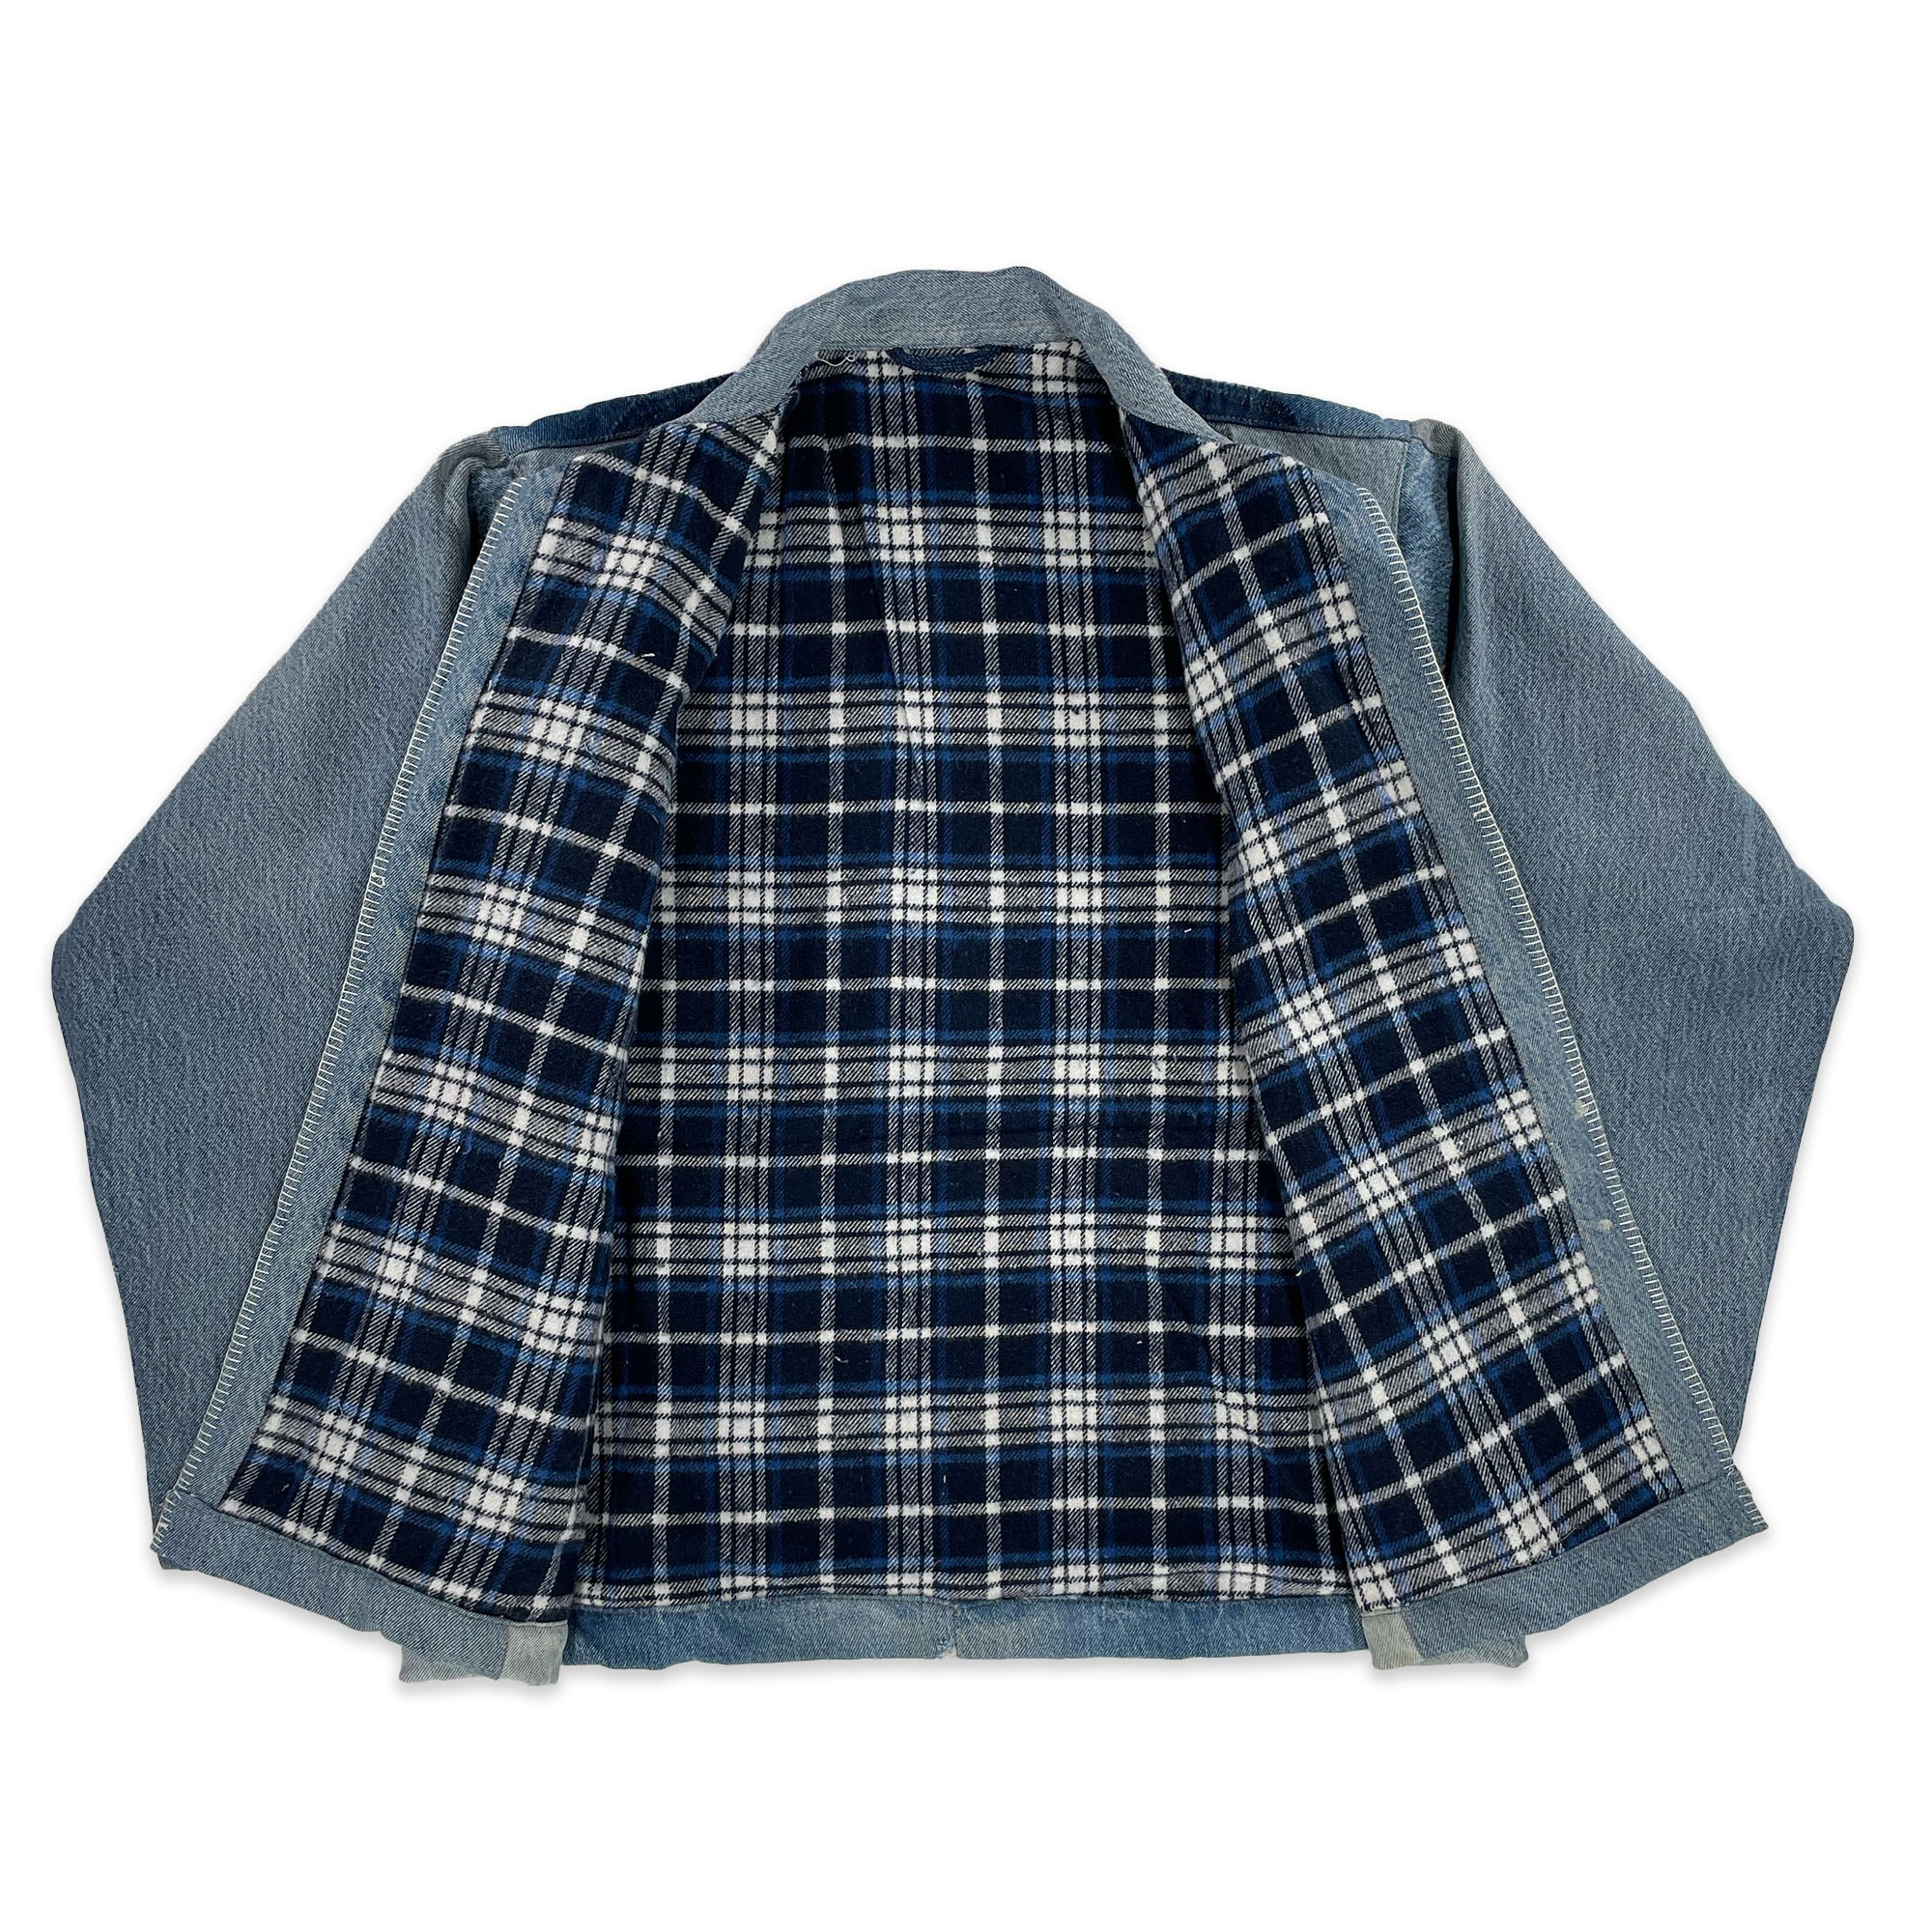 Chore Coat Made From Upcycled Work Jeans - Blanket Stitching - XL